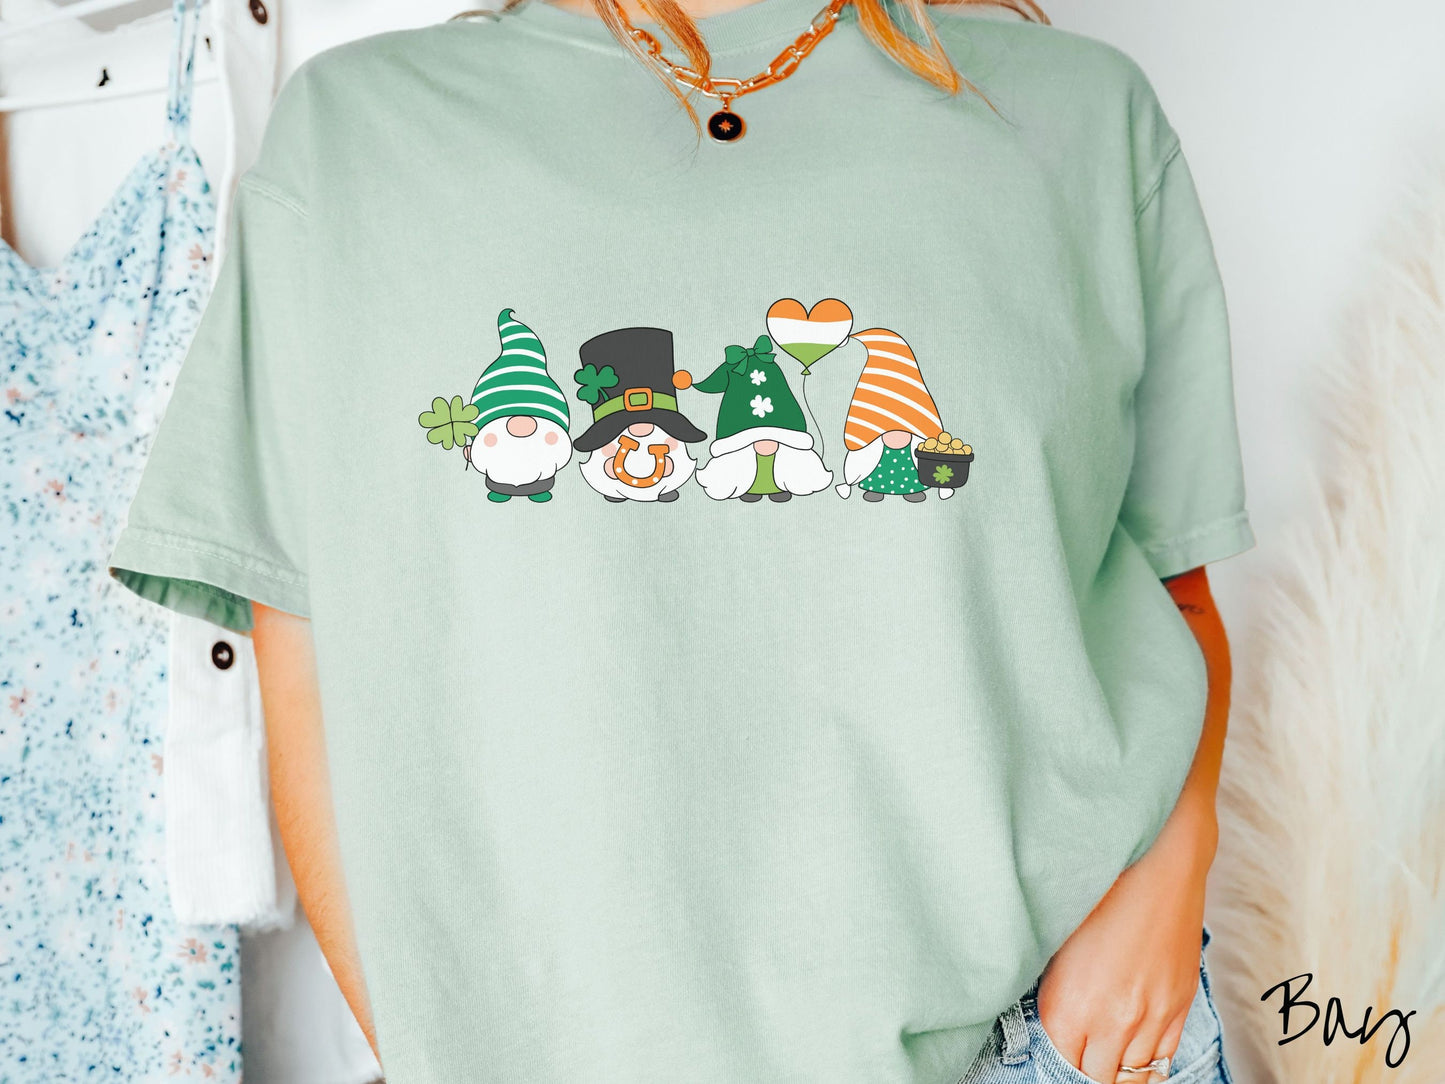 A woman wearing a vintage, bay colored shirt with four festive gnomes wearing varying green, white, and orange hats holding a green clover, an inflatable balloon, an orange horse shoe, and a pot of gold.